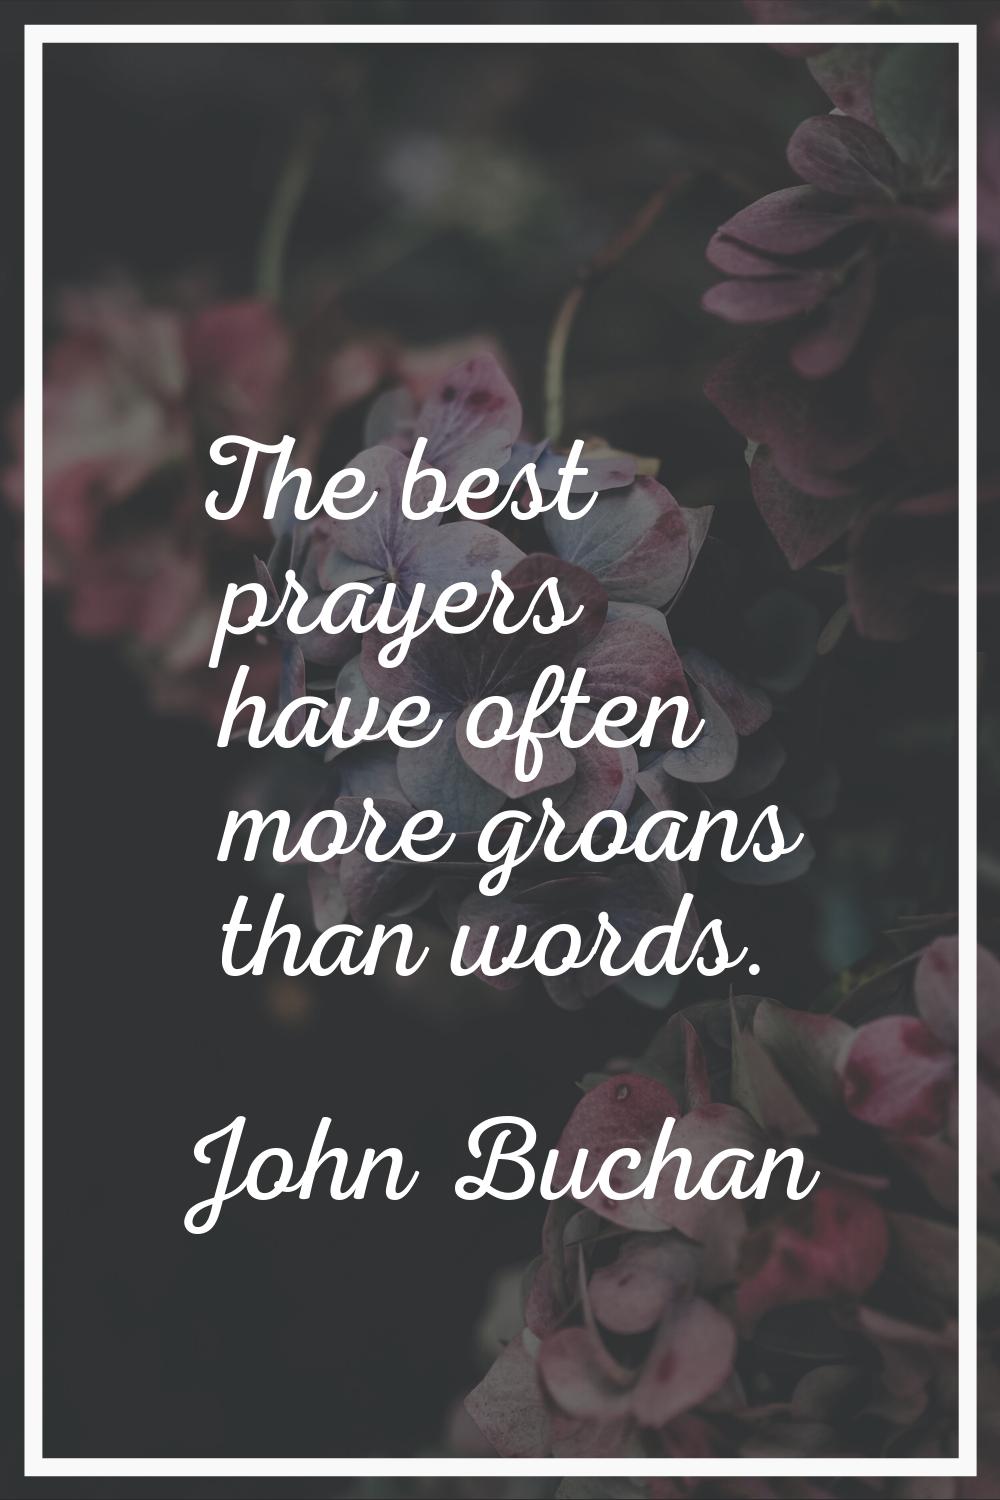 The best prayers have often more groans than words.